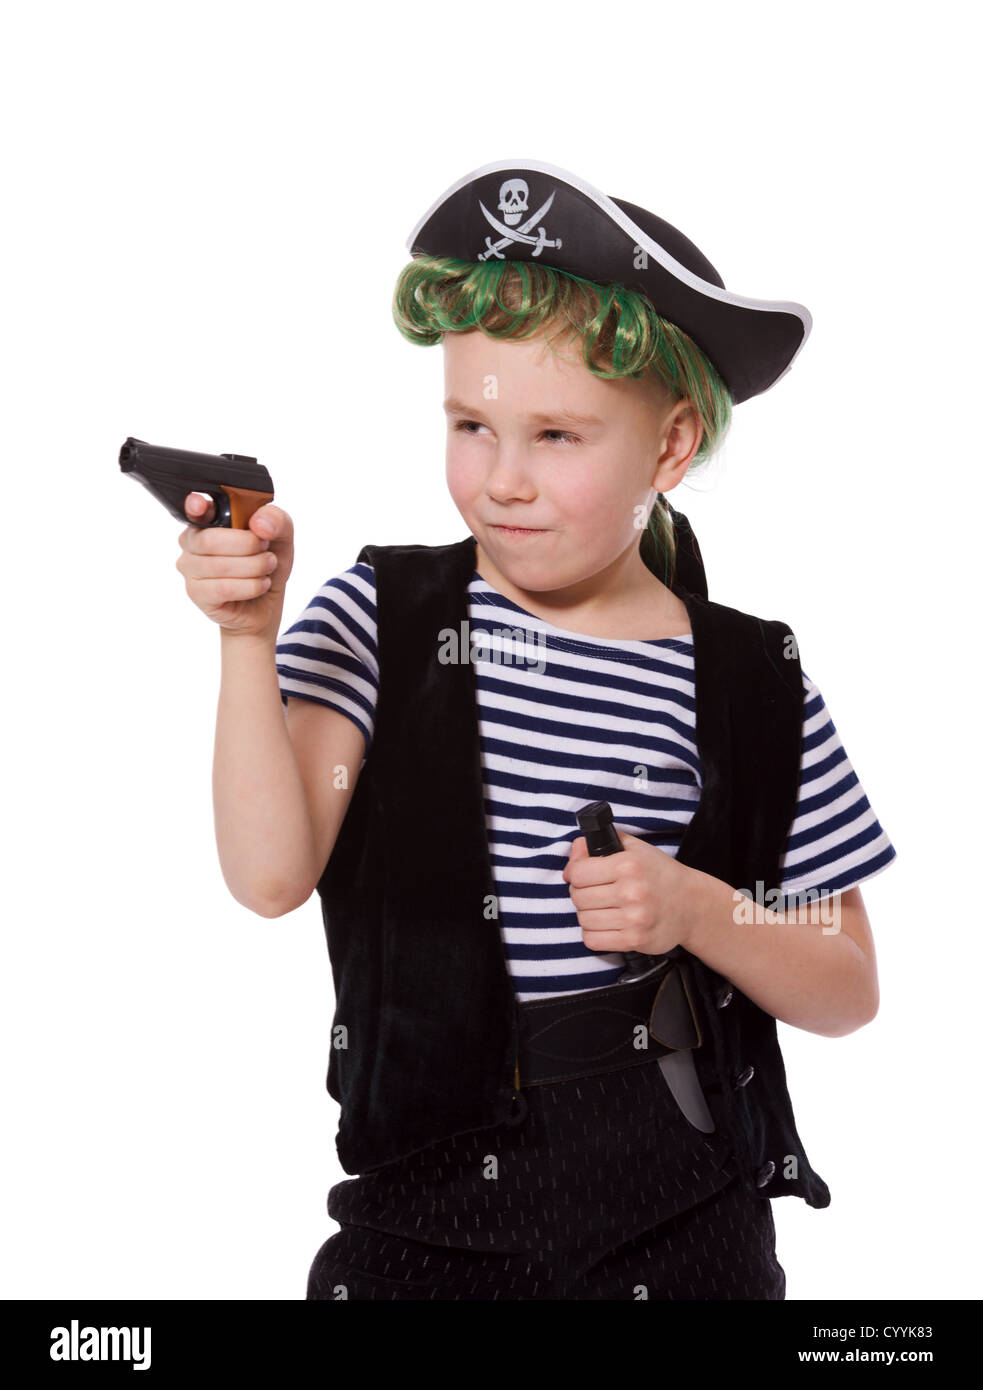 Boy wearing pirate costume shooting pistol isolated on white Stock Photo